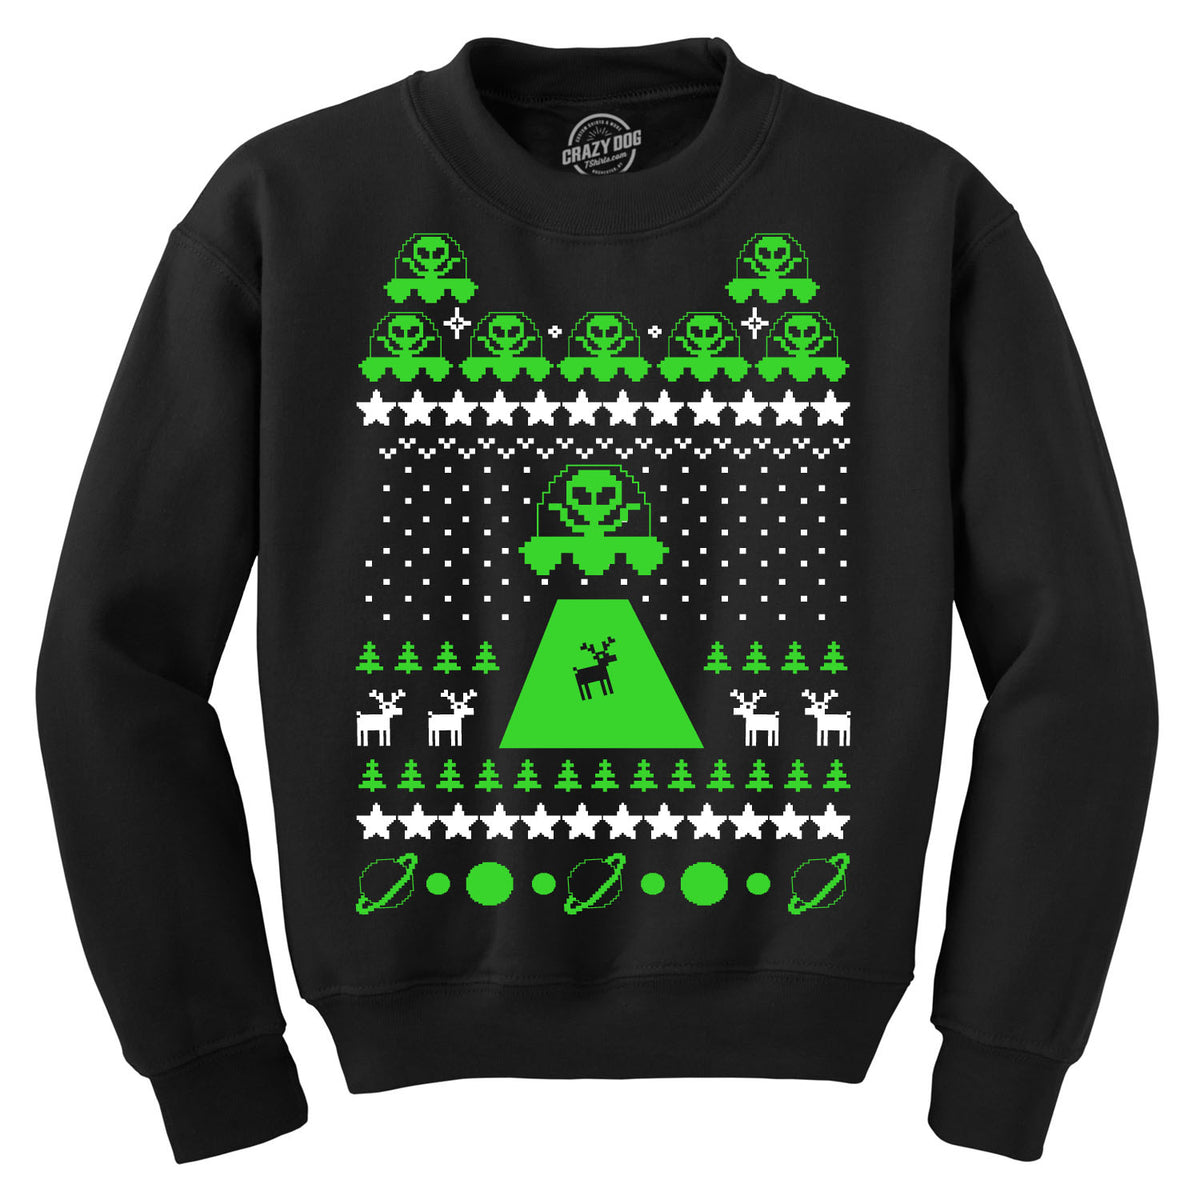 Funny Black Alien Abduction Ugly Christmas Sweater Sweatshirt Nerdy Christmas Ugly Sweater Space Tee